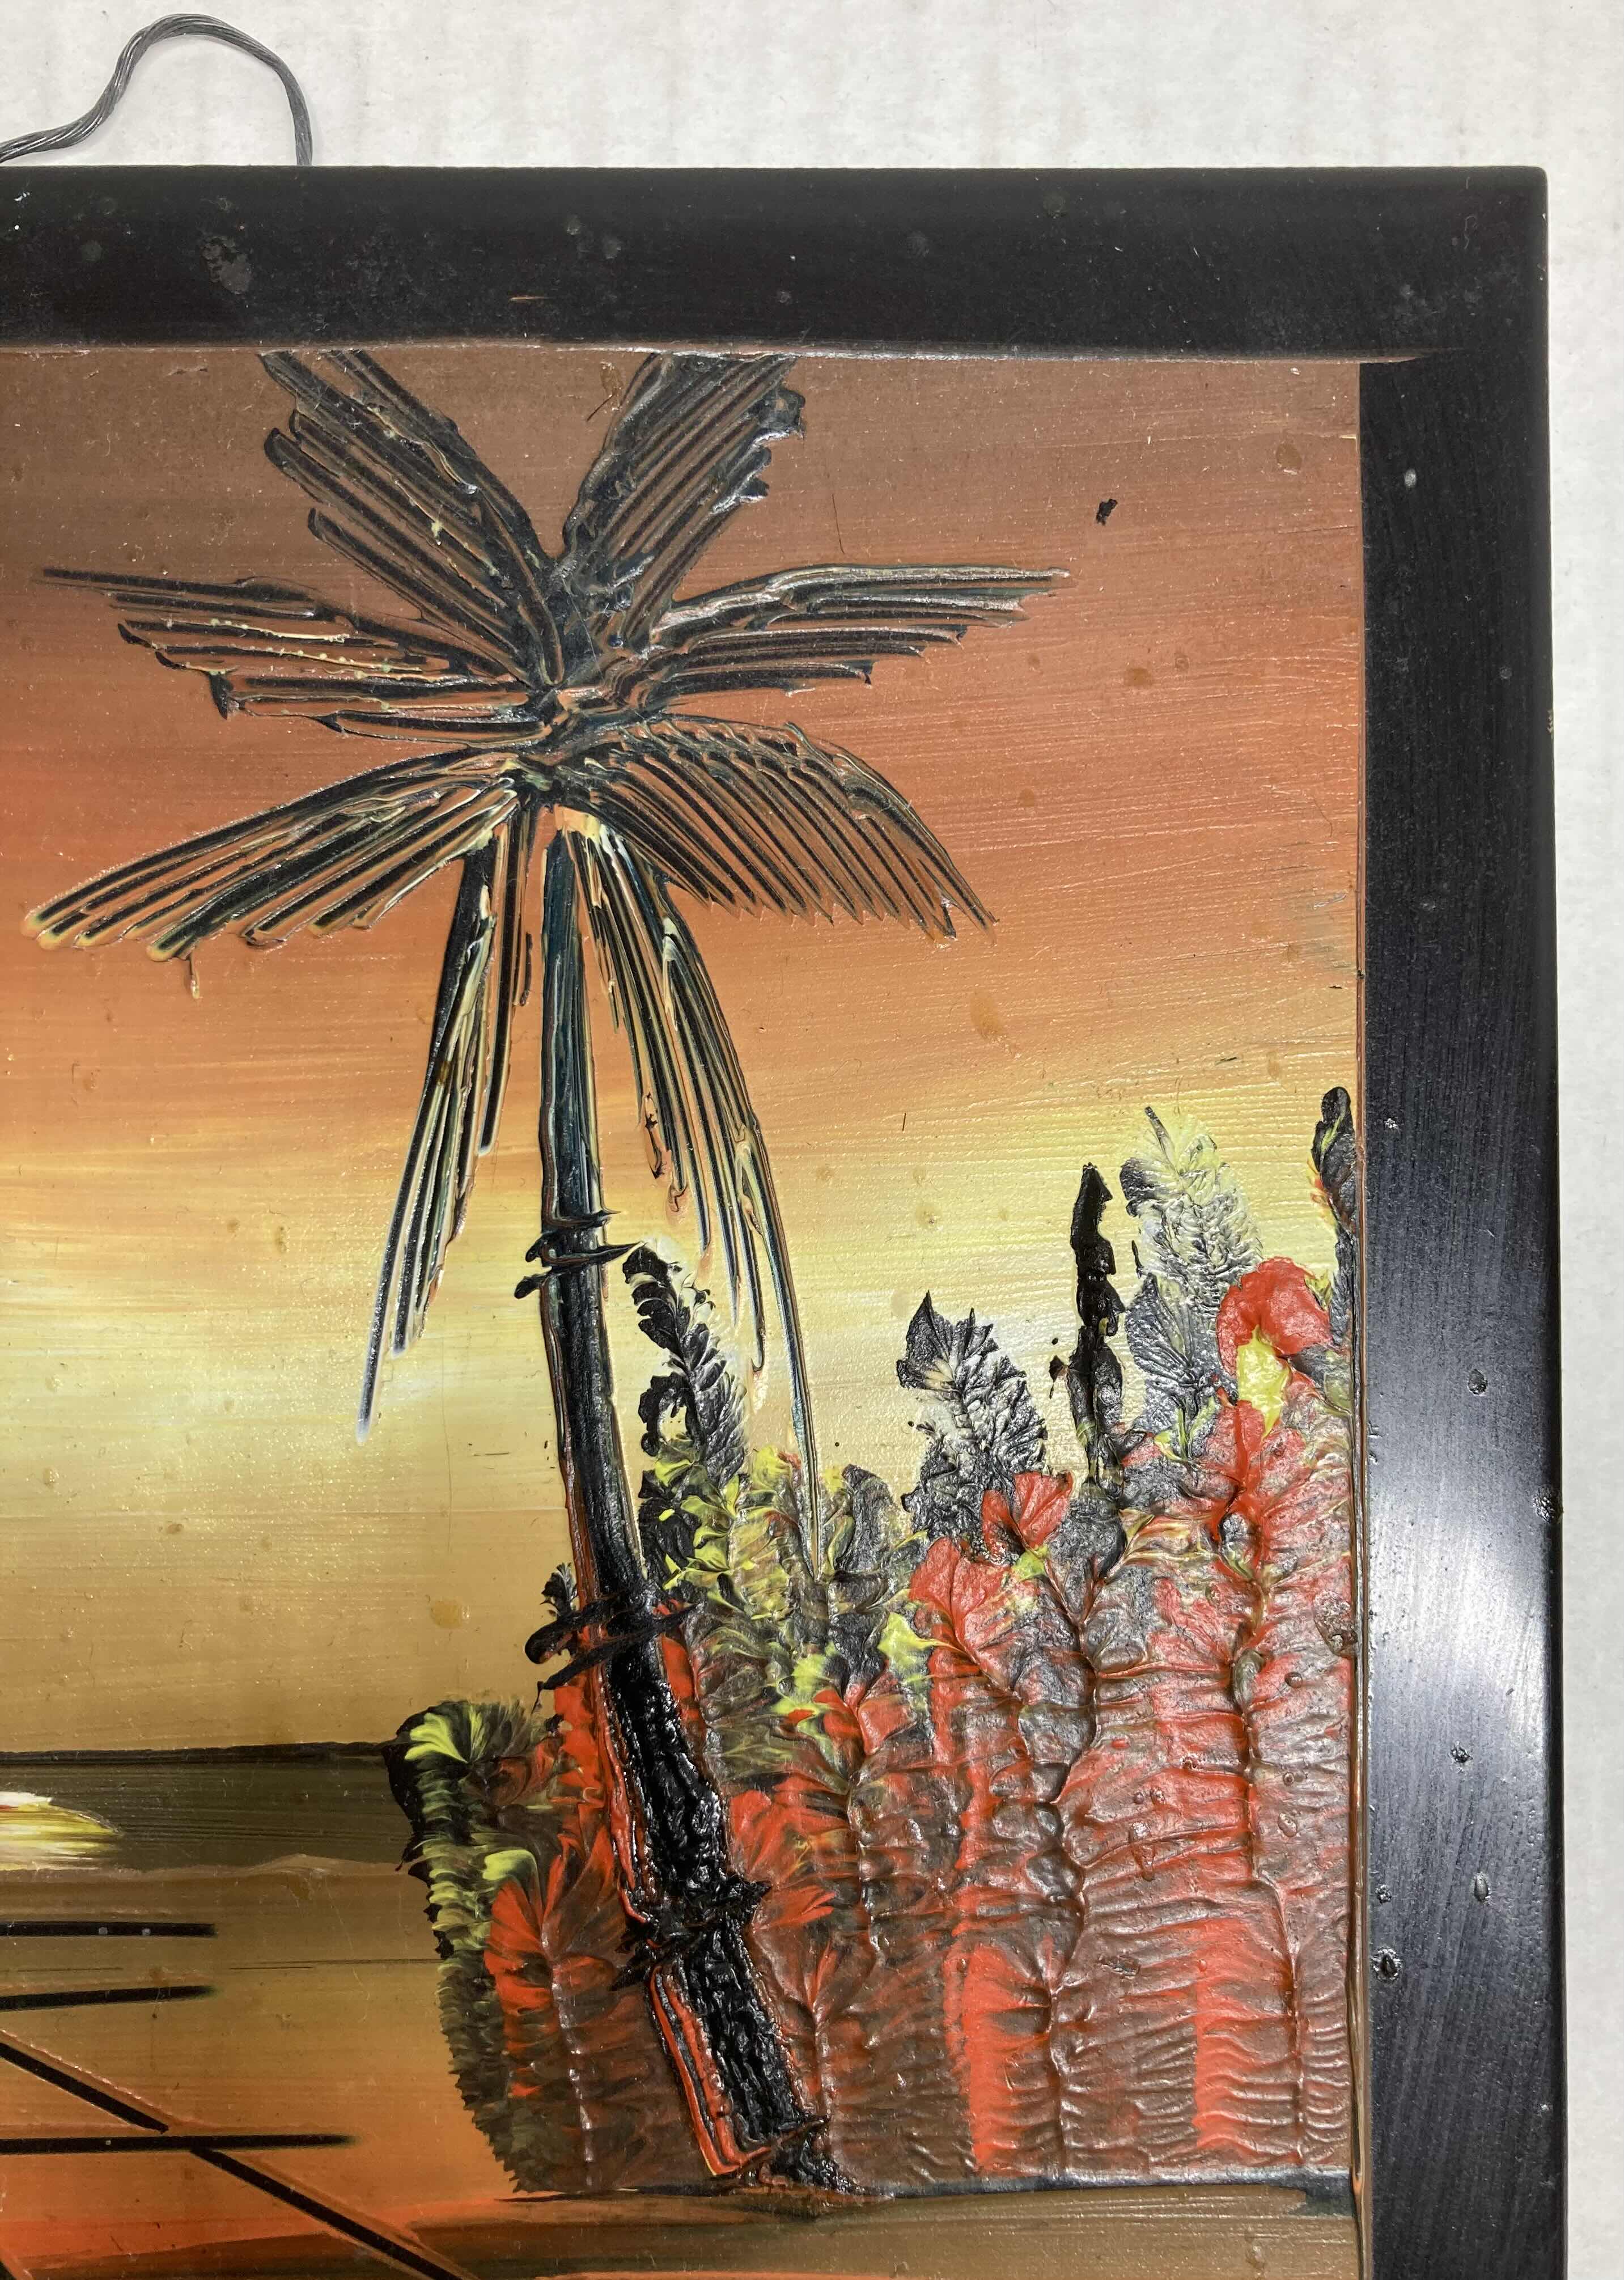 Photo 2 of TROPICAL SUNSET COUPLE TILE FINGER PAINTING PUERTO VALLARTA SIGNED BY ARTIST 2011 8” X 8”